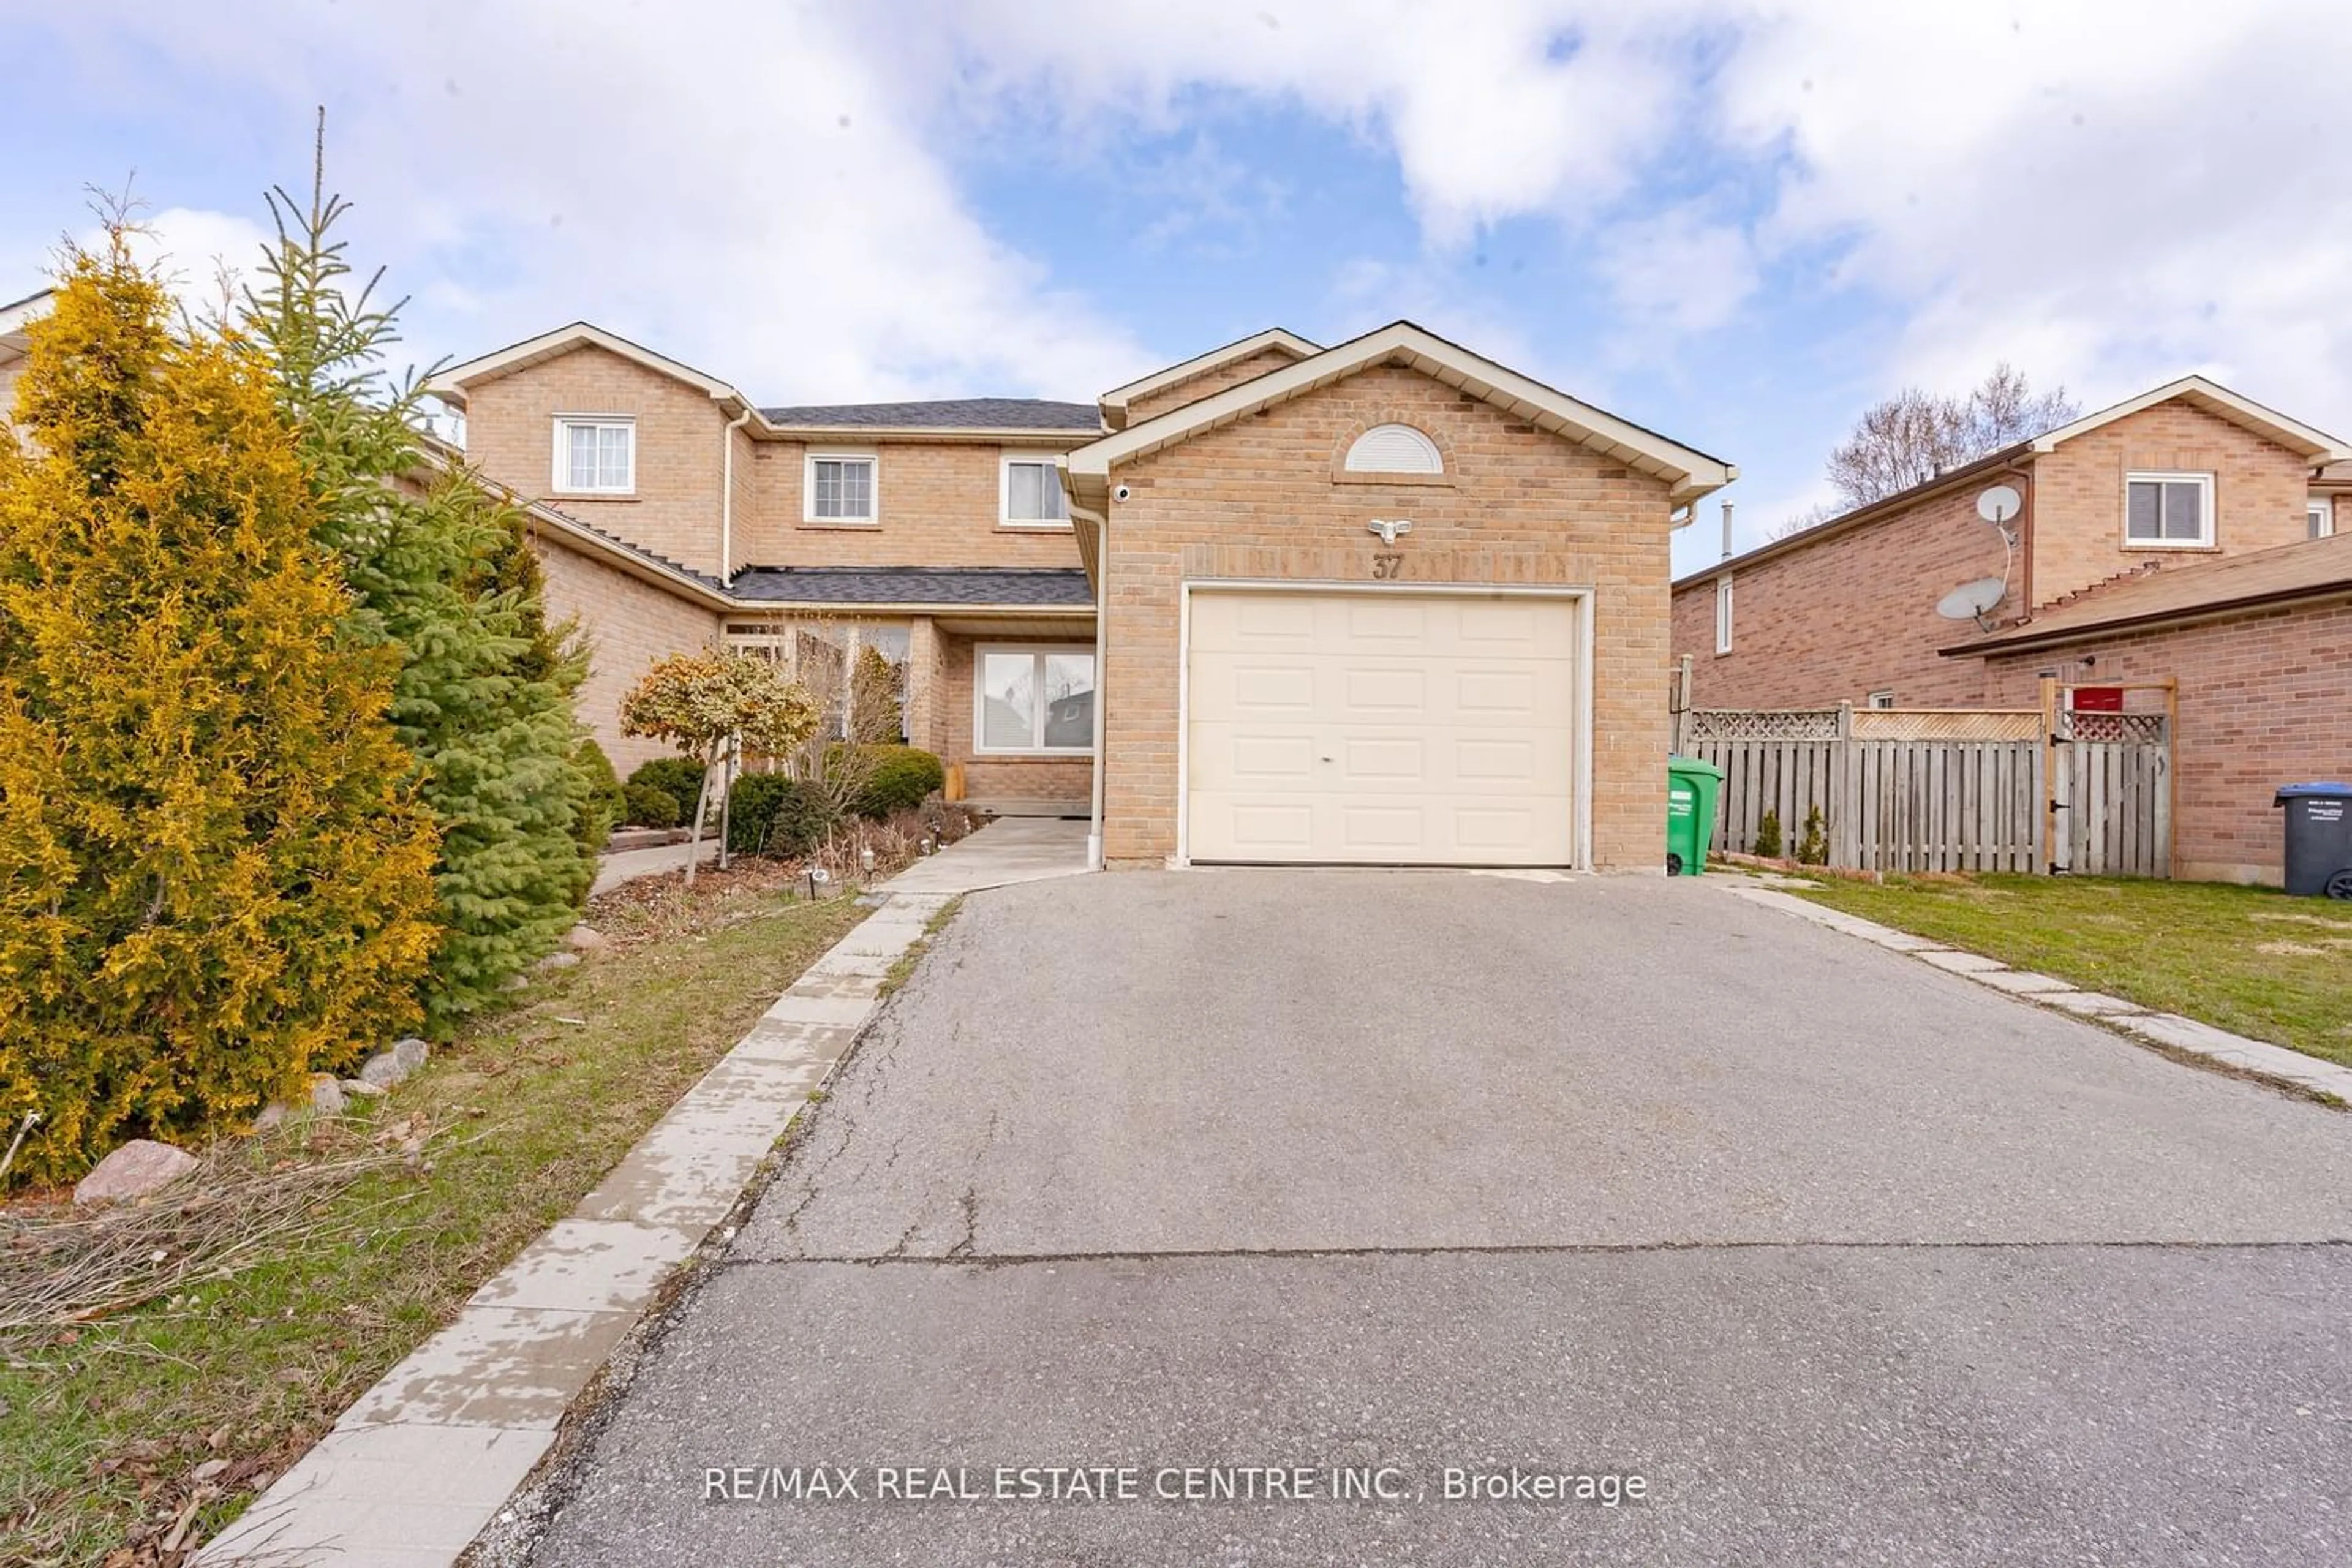 Frontside or backside of a home for 37 Ebby Ave, Brampton Ontario L6Z 3T1